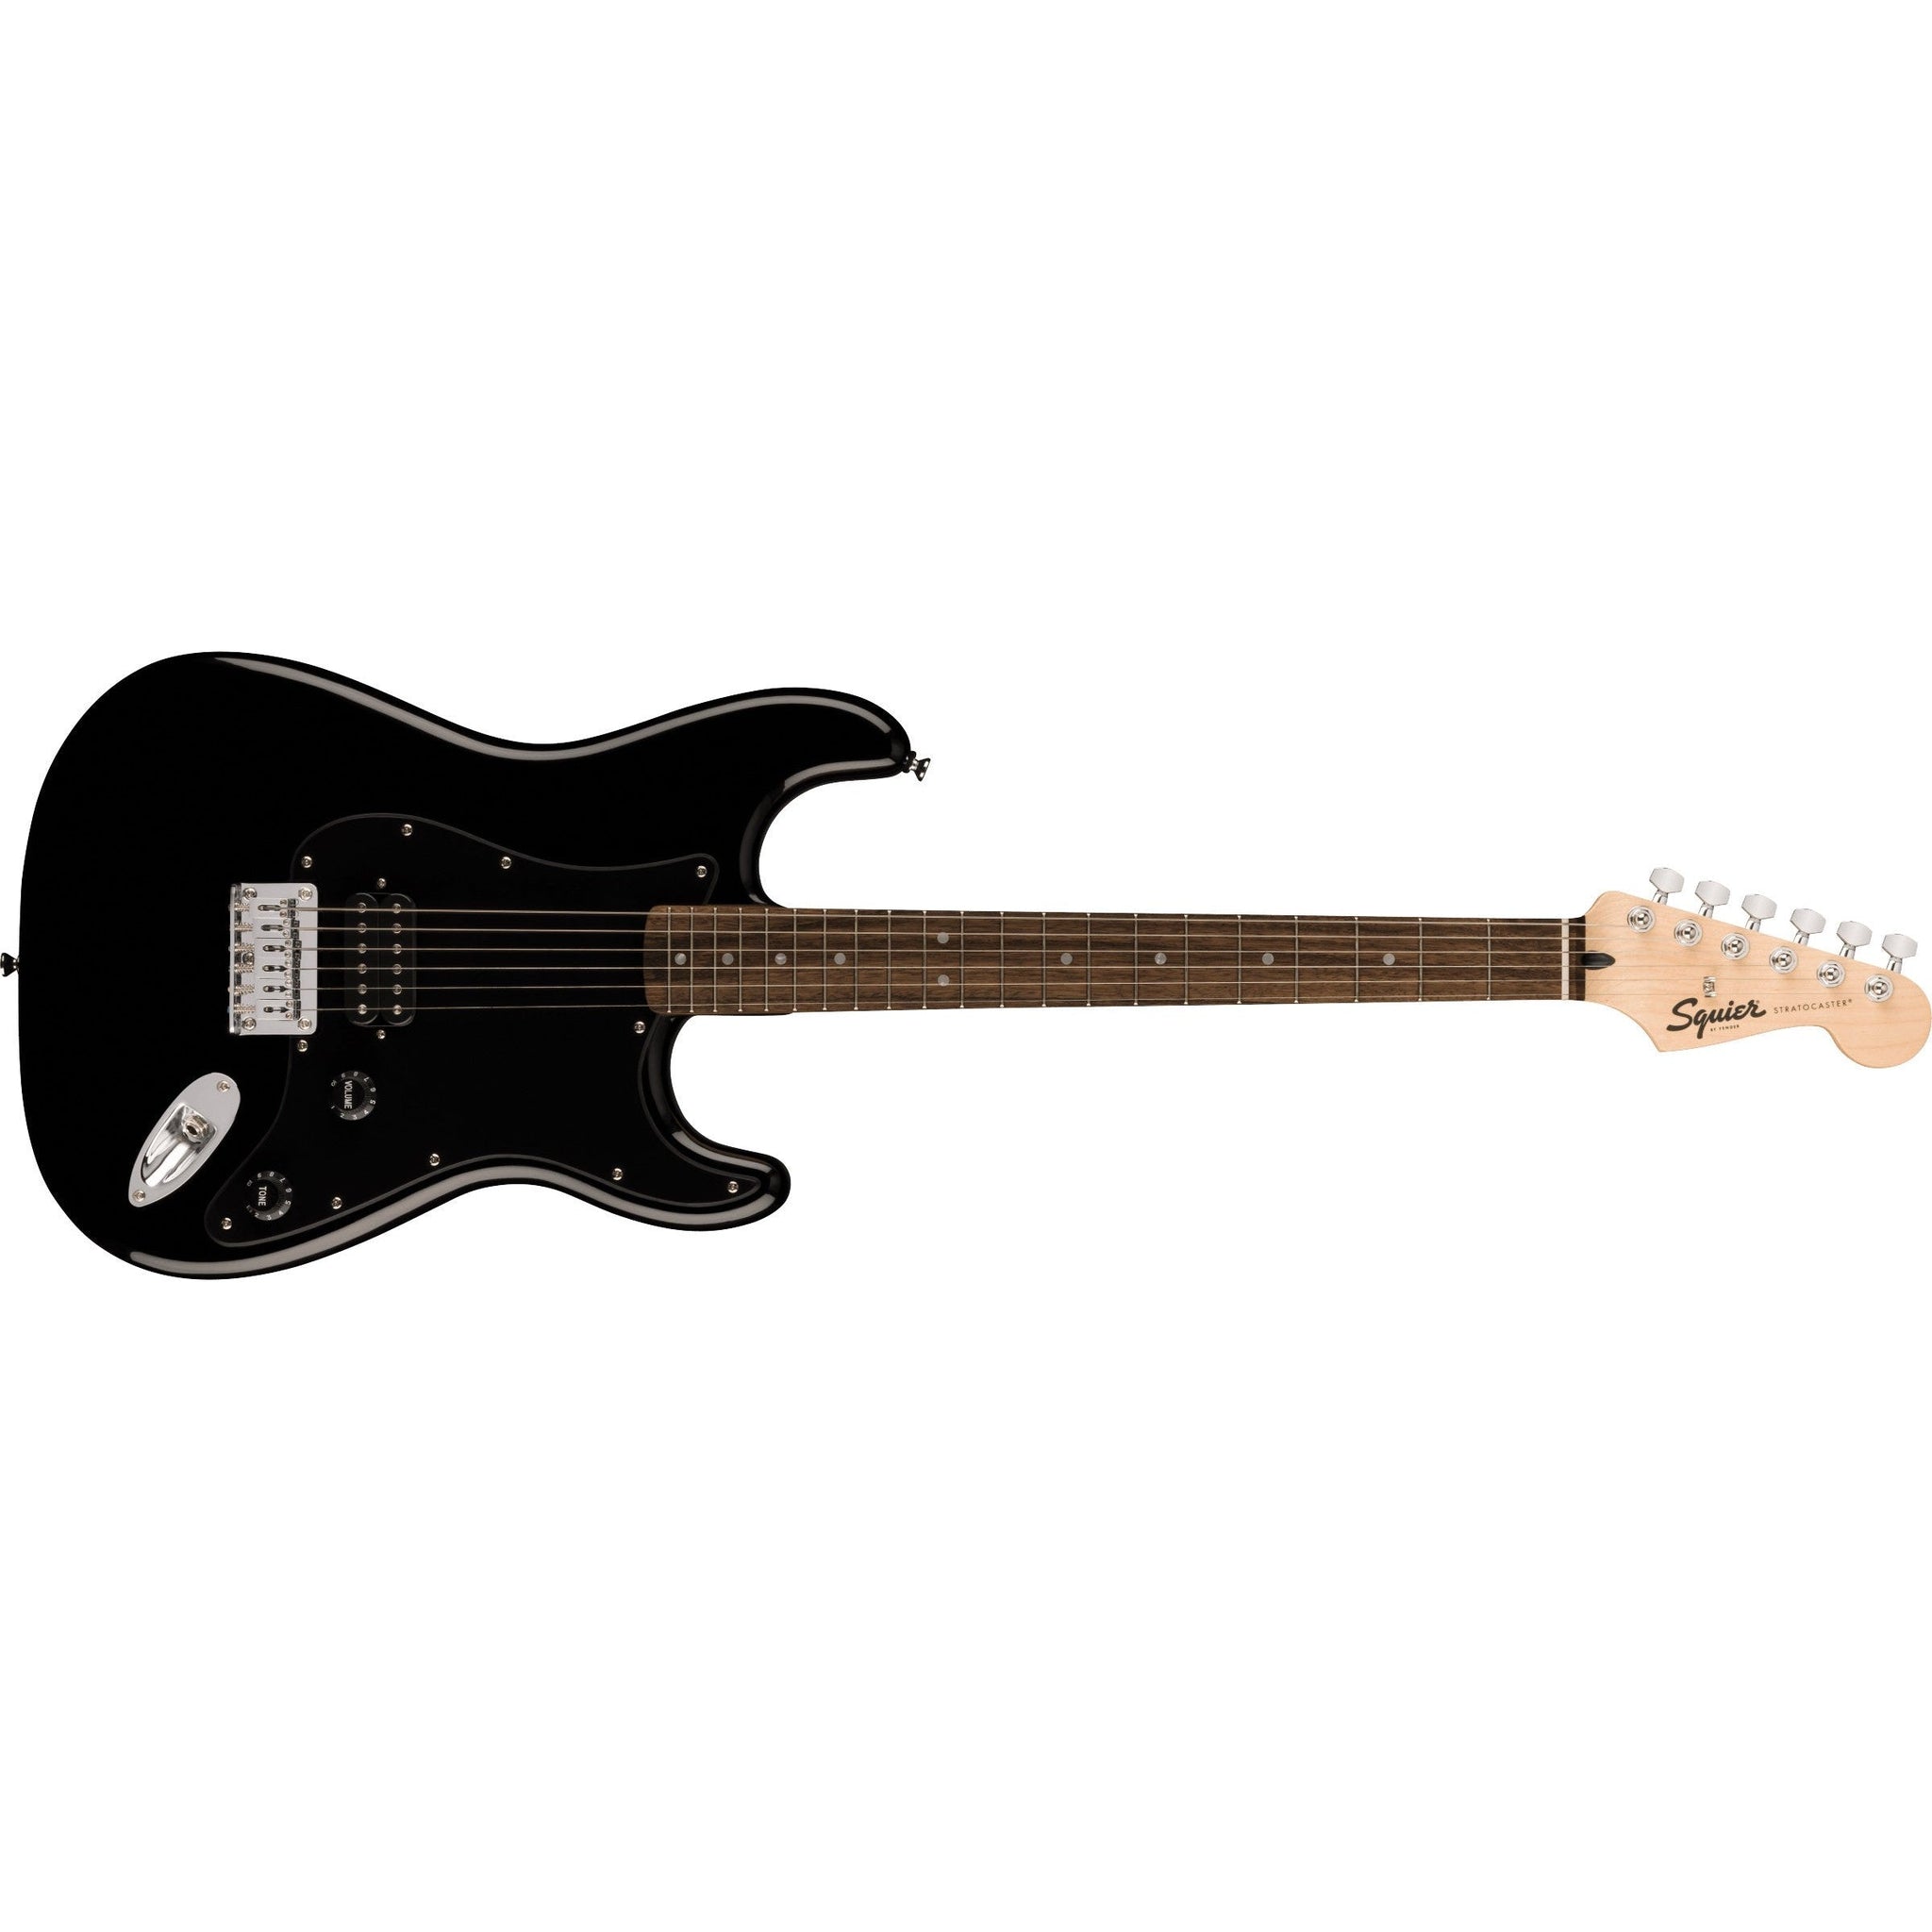 Fender Squier Sonic Stratocaster Electric Guitar HT H-Black-Music World Academy